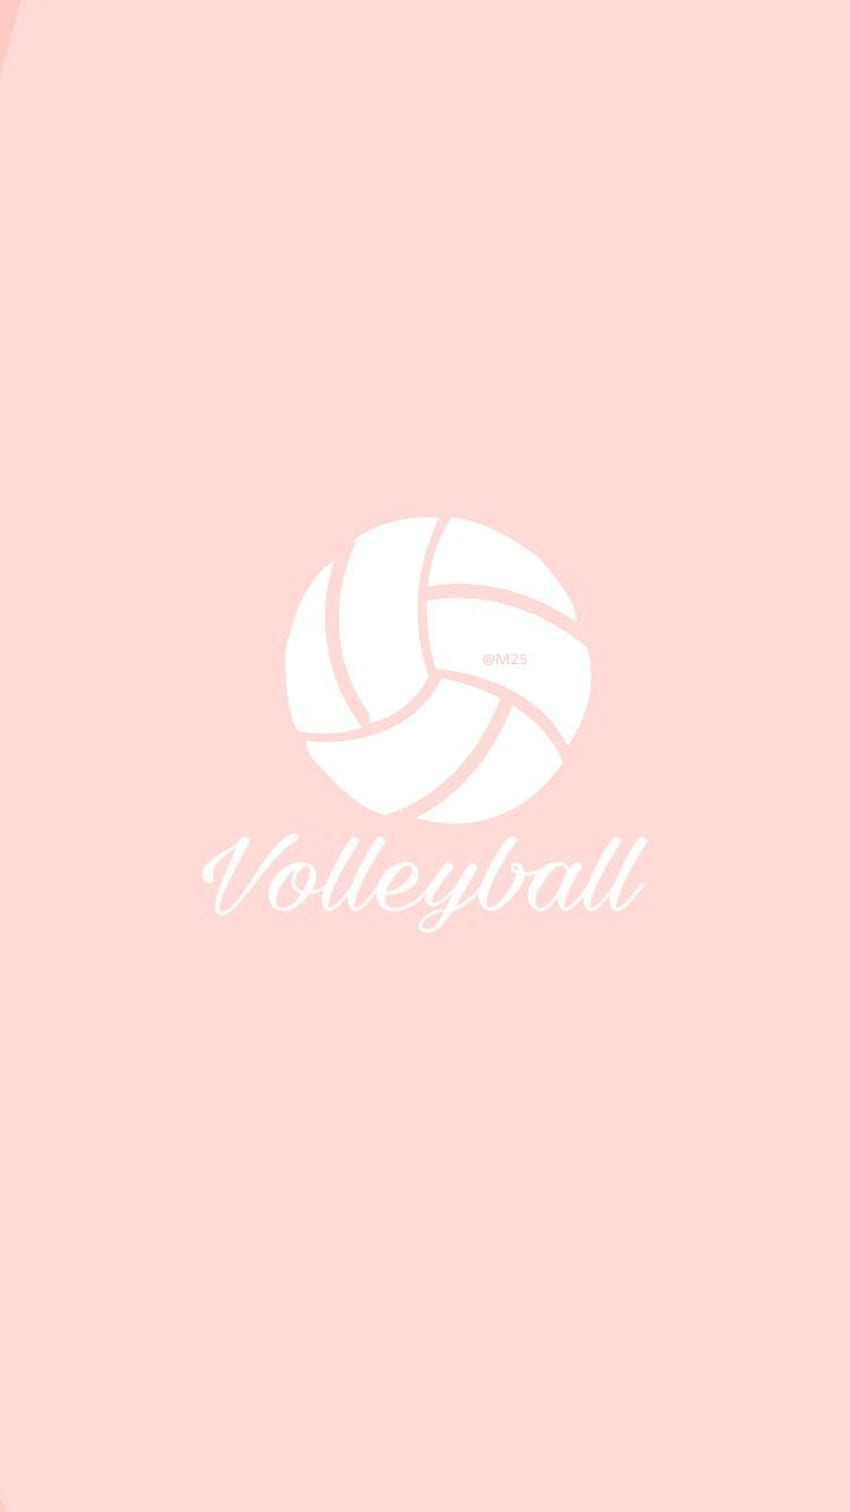 Glowing Colorful Volleyball Illustration Stock Vector  Illustration of  glowing badge 52807537